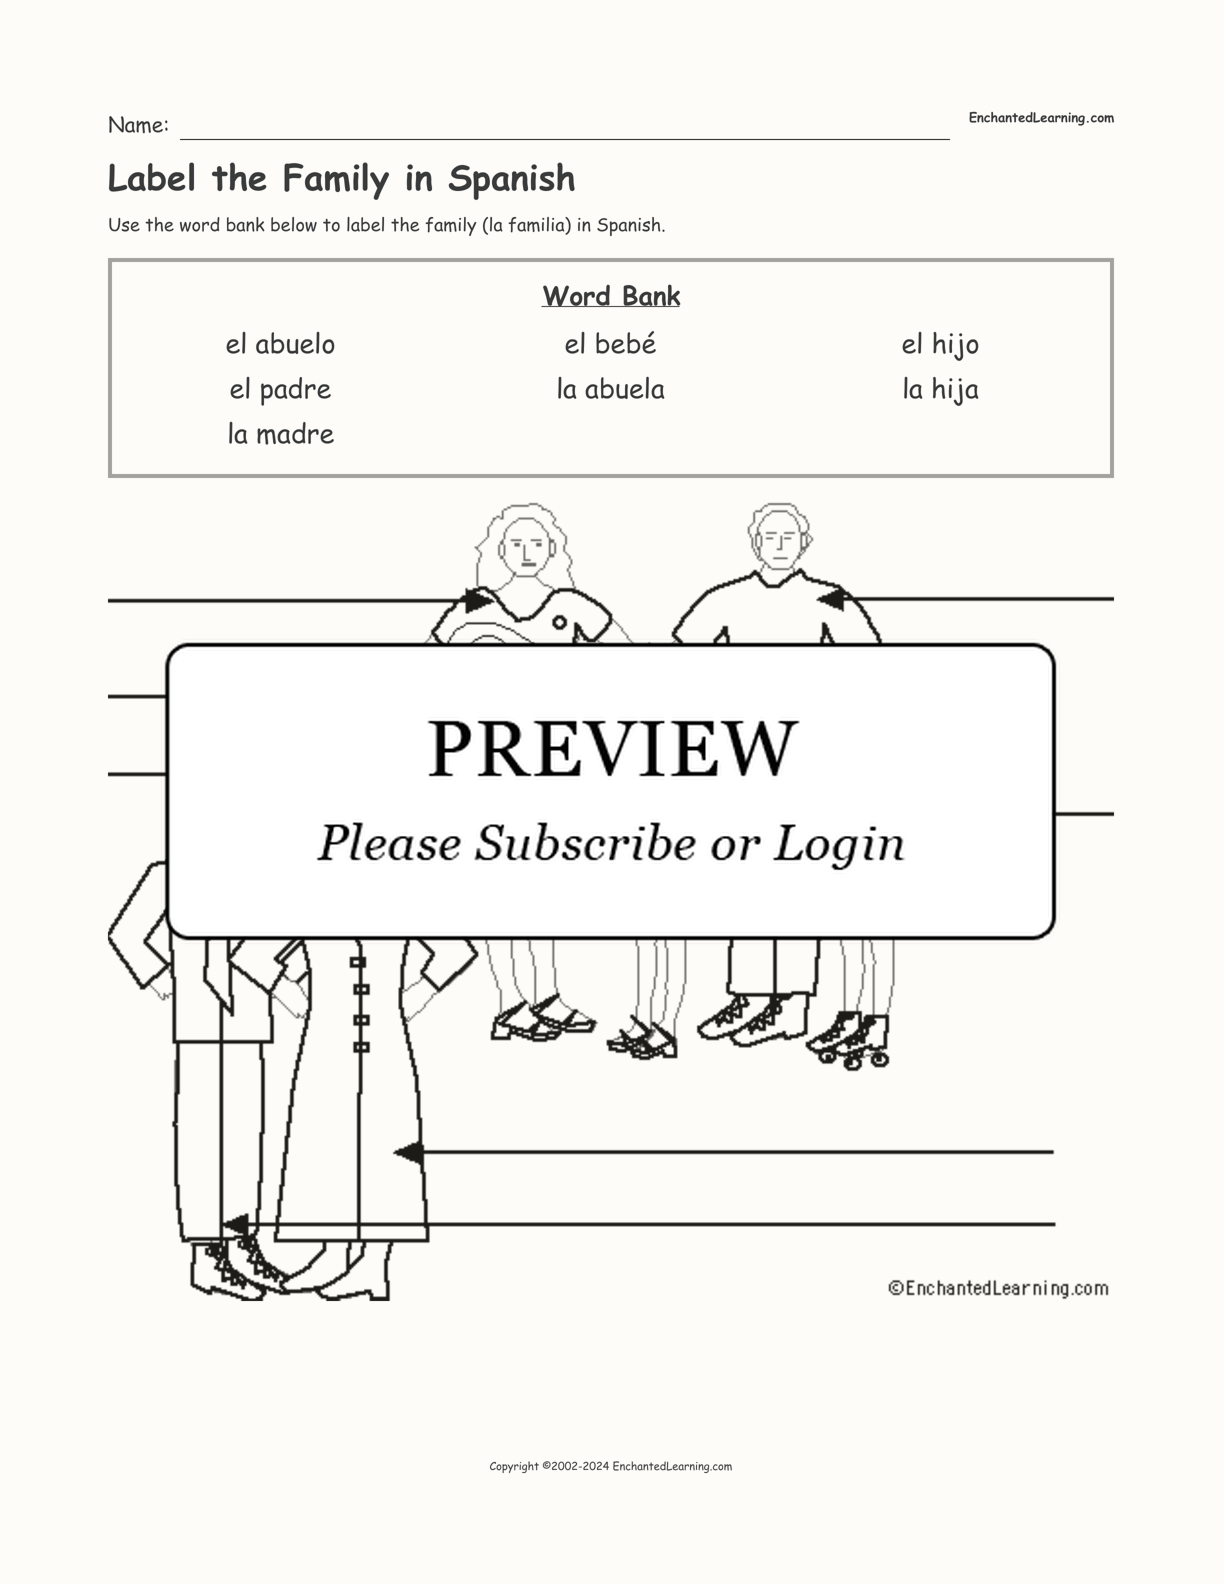 Label the Family in Spanish interactive worksheet page 1